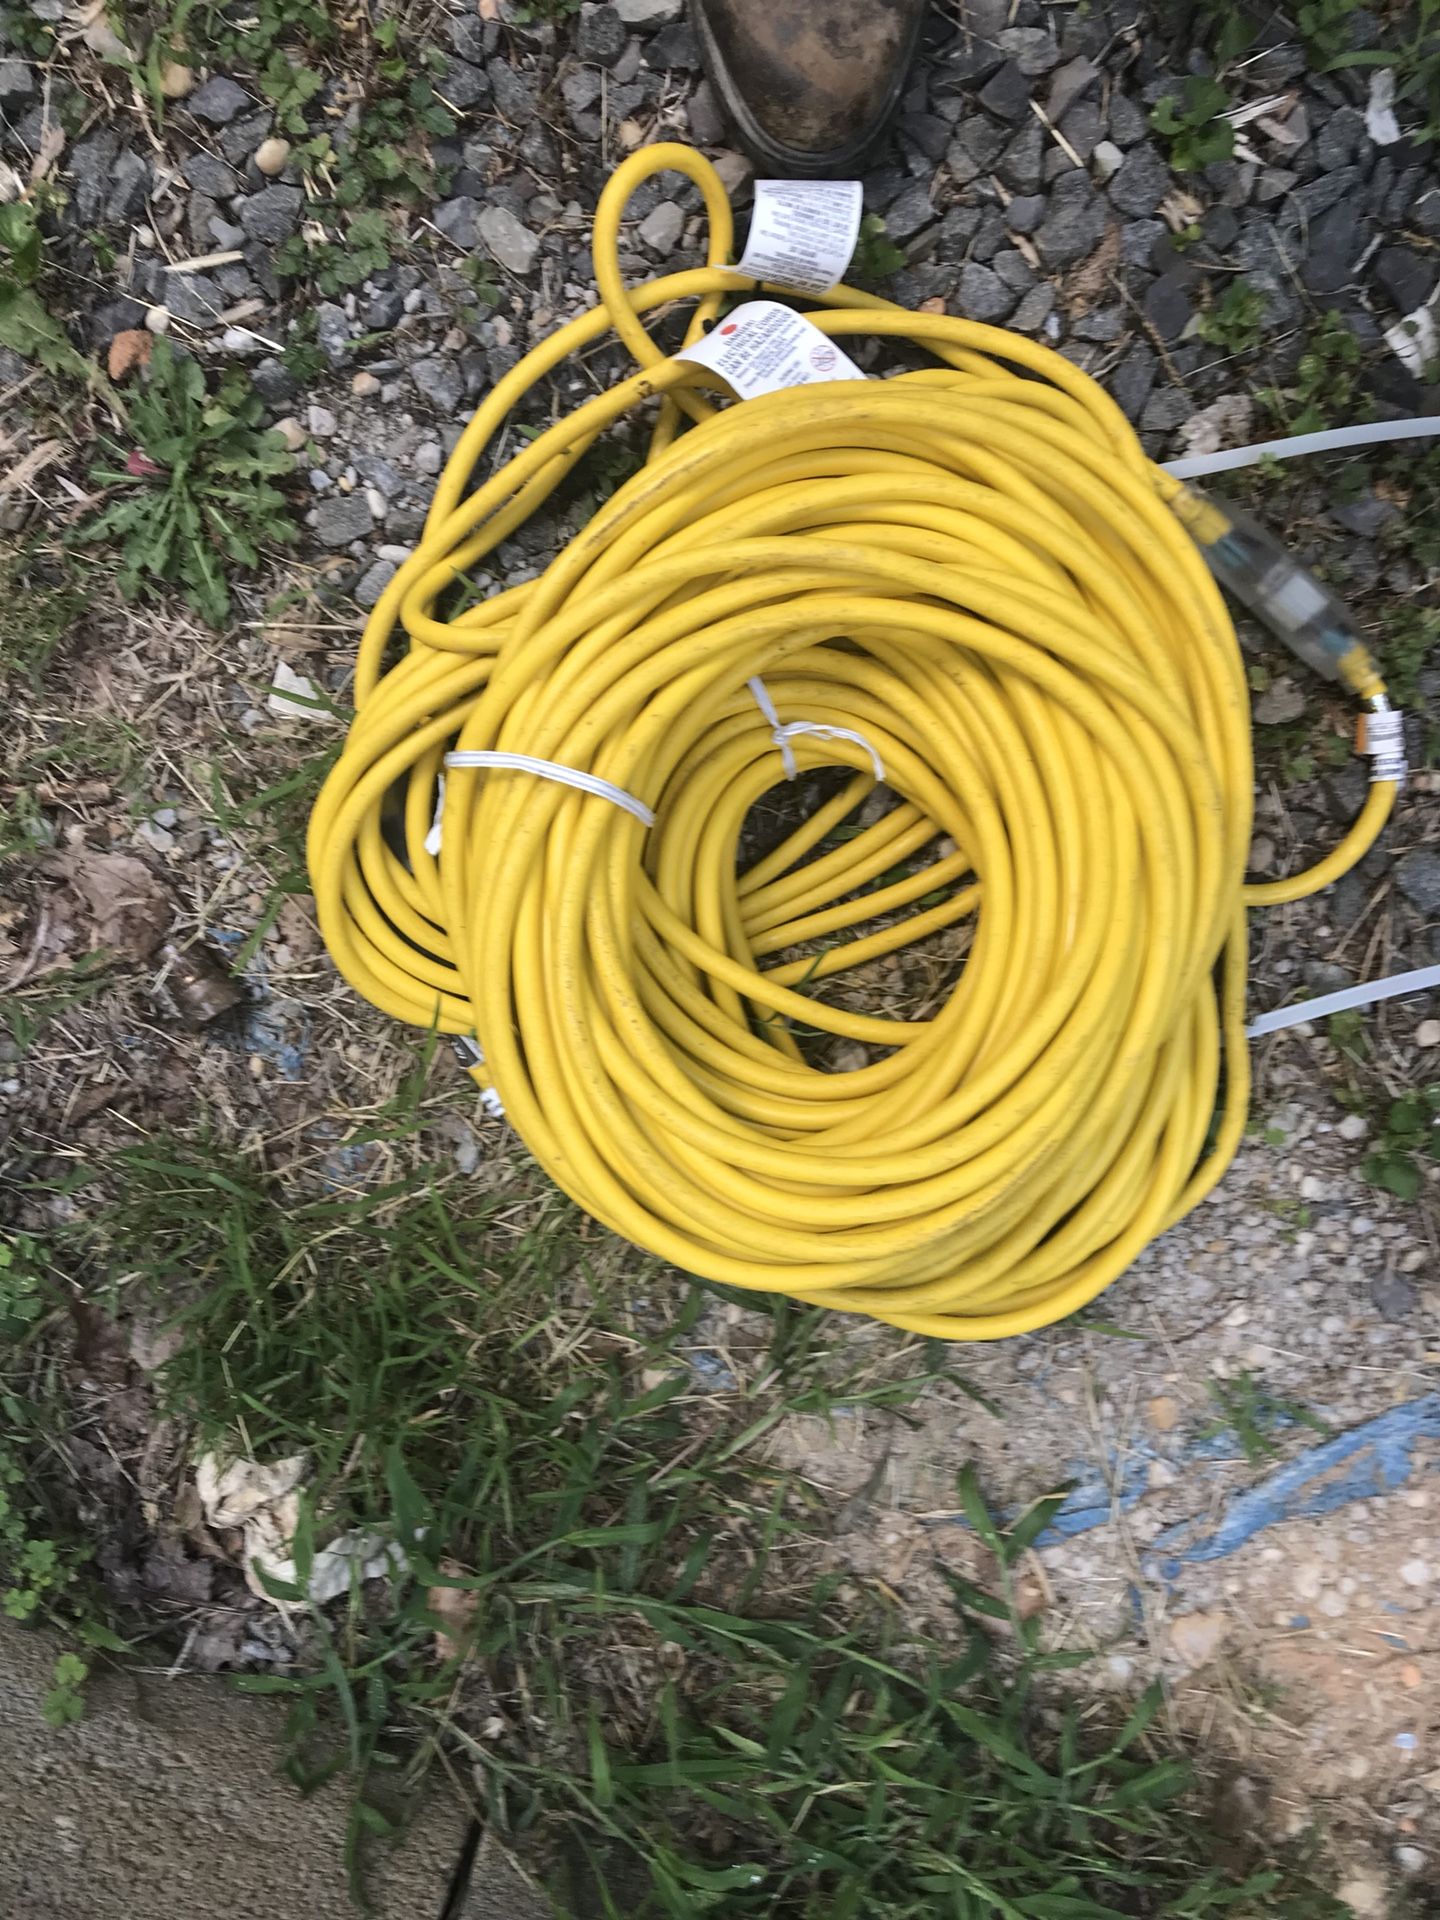 New extension cord hundred feet long 50$